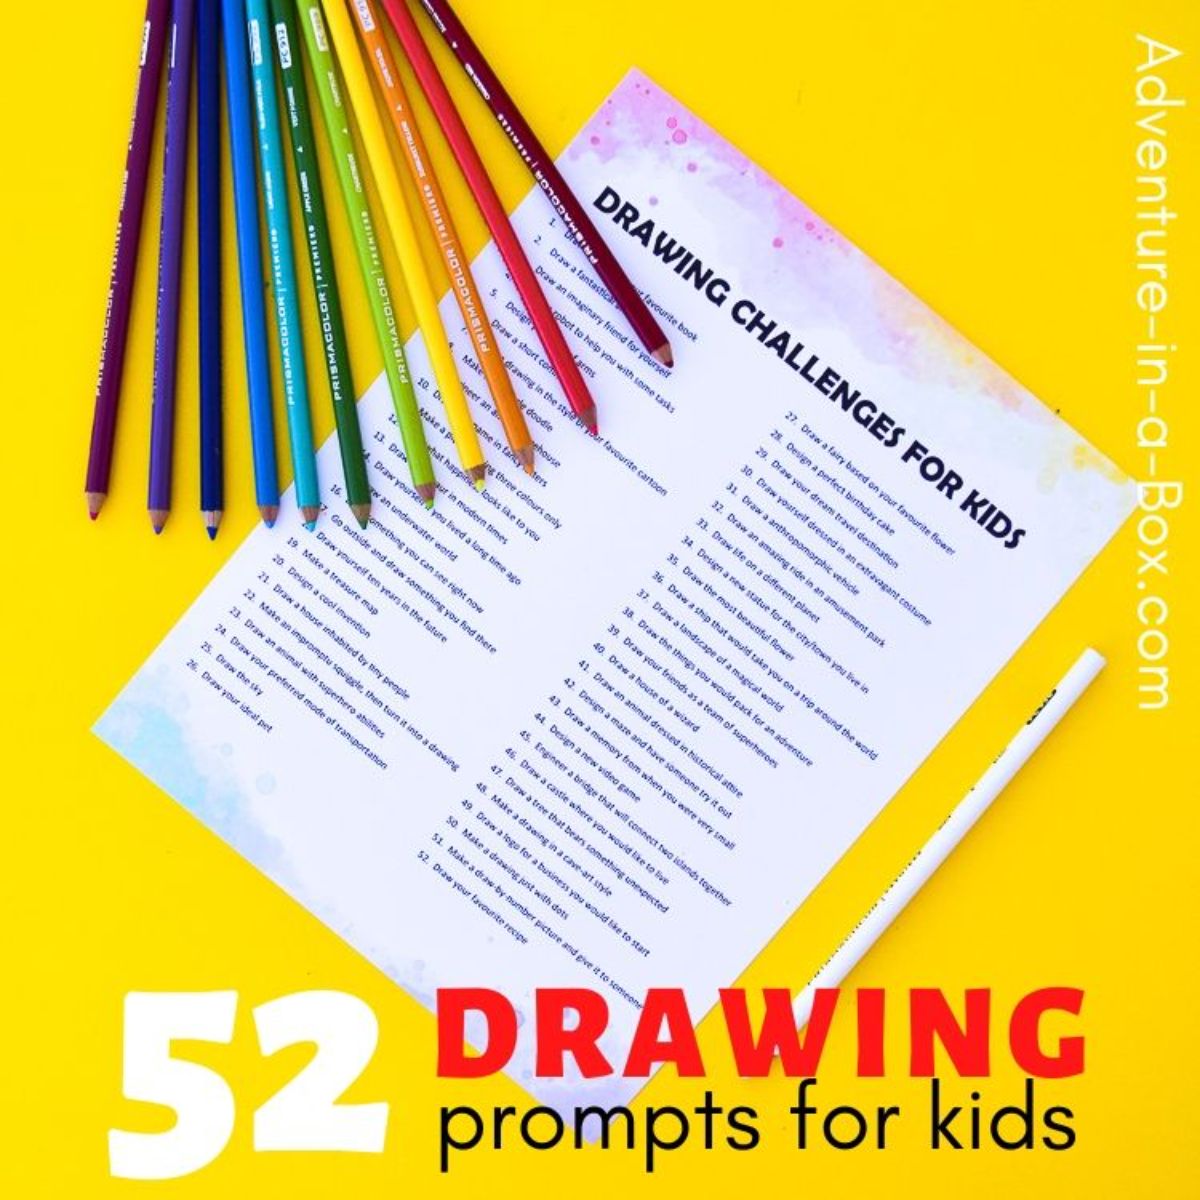 on a yellow background is a sheet saying "Drawing Challenges for Kids" colored pencils are arranged above it. The text reads "52 Drawing prompts for kids"